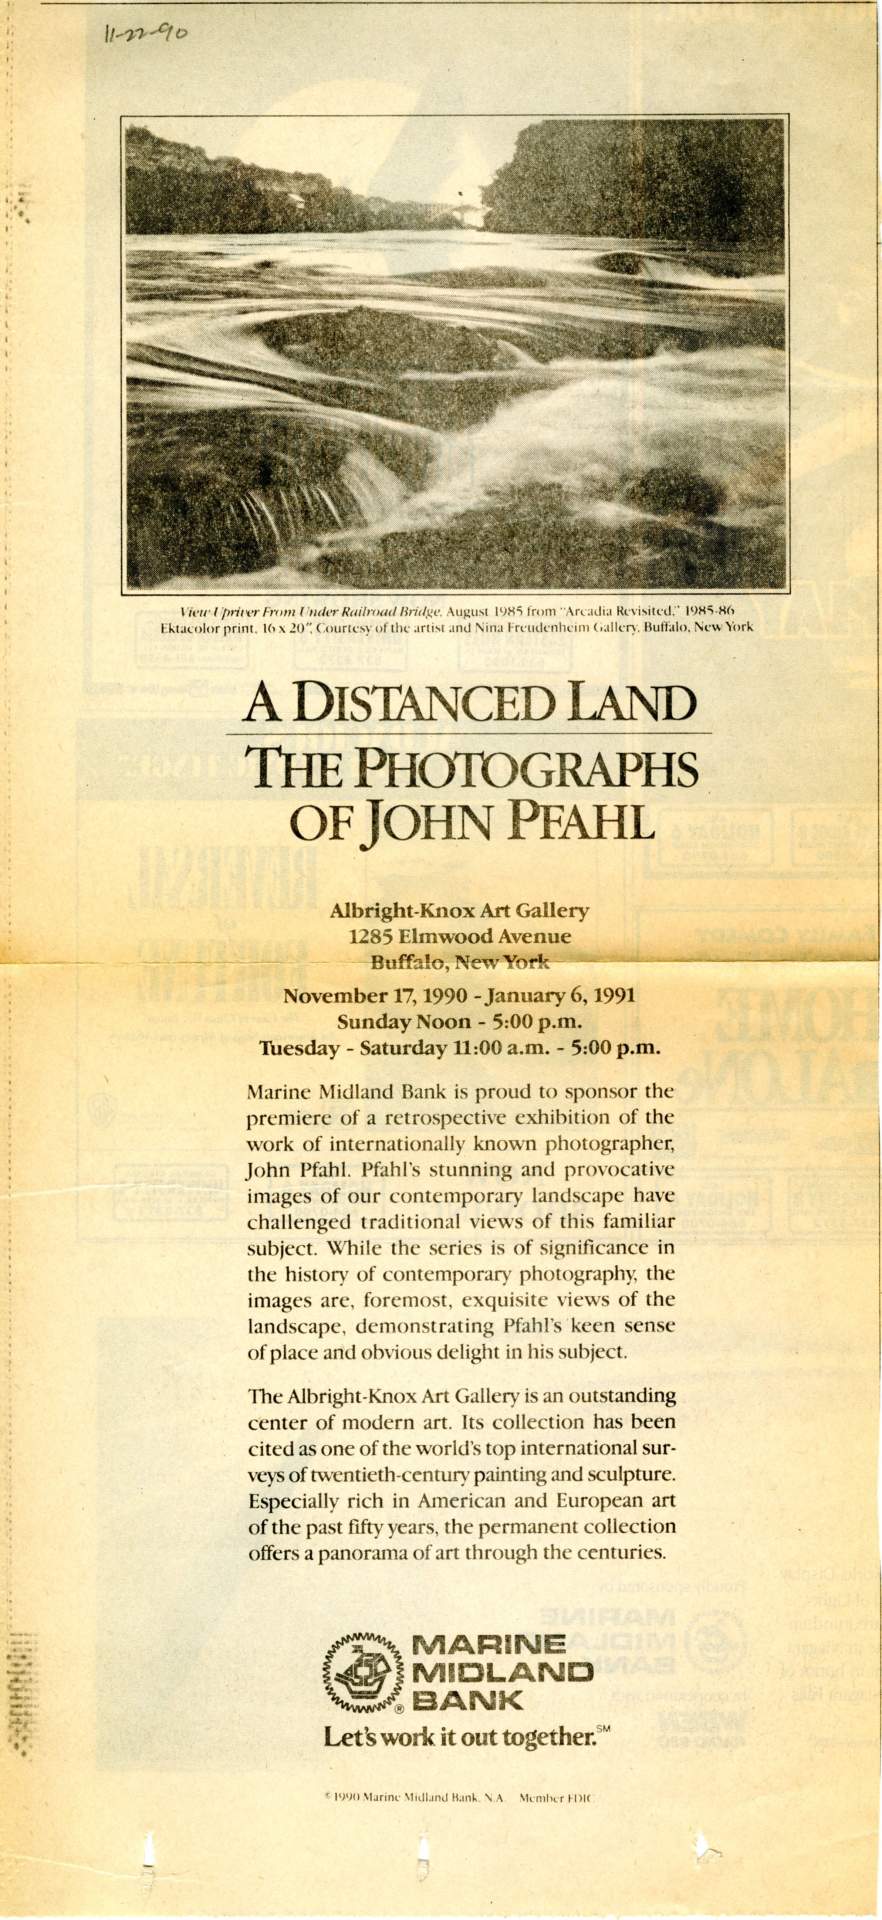 [Print ad for John Pfahl Exhibition at the Albright Knox]